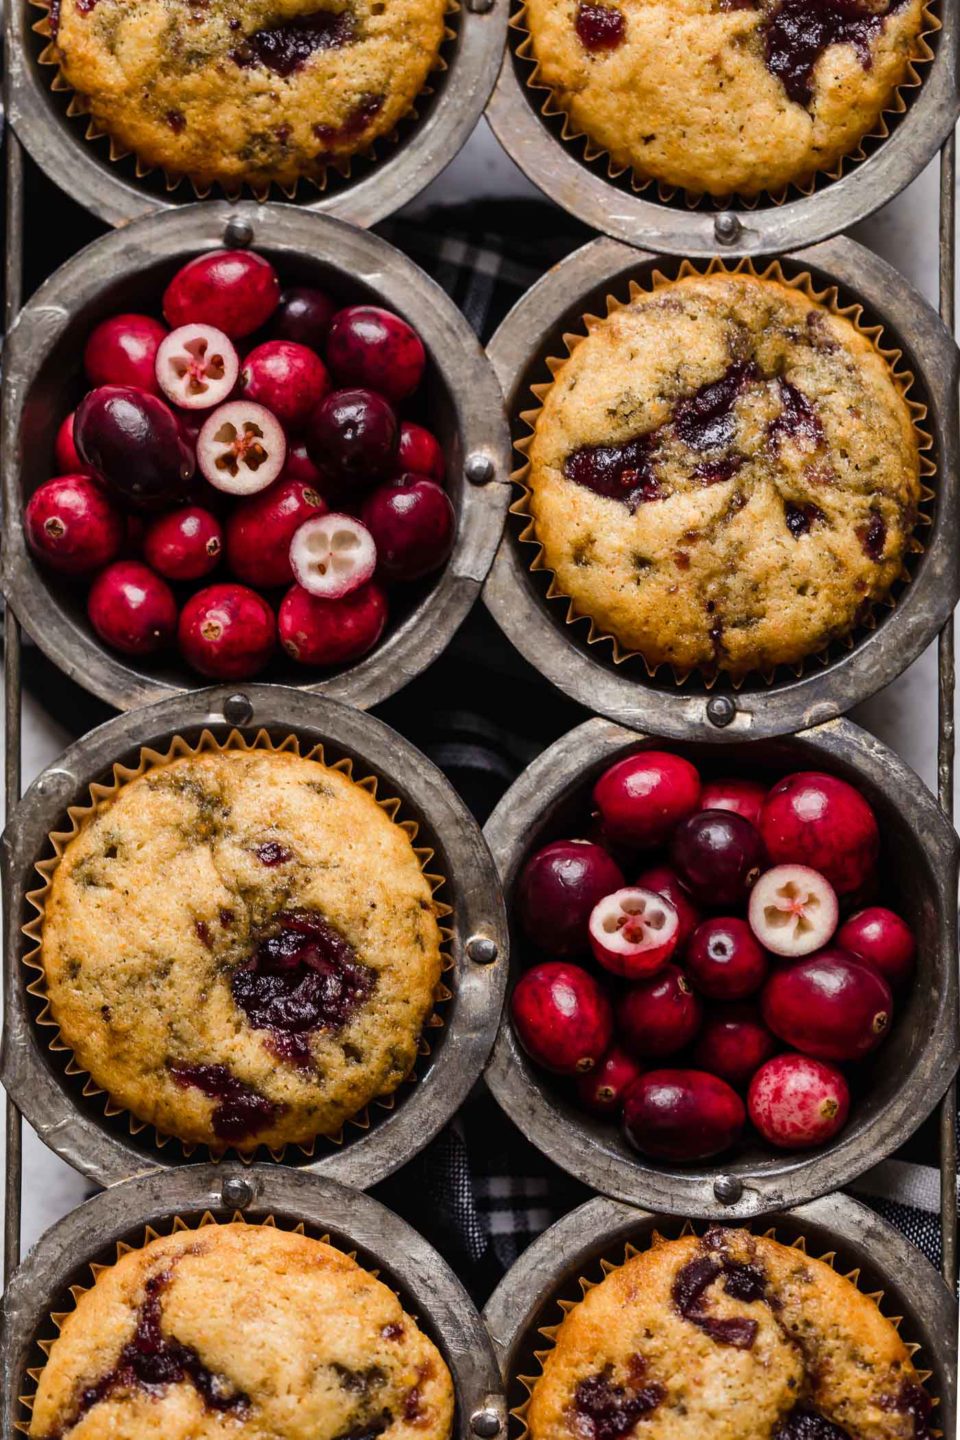 Cranberry corn muffins placed in a vintage muffin pan. 2 of the muffin cups are filled with fresh cranberries.